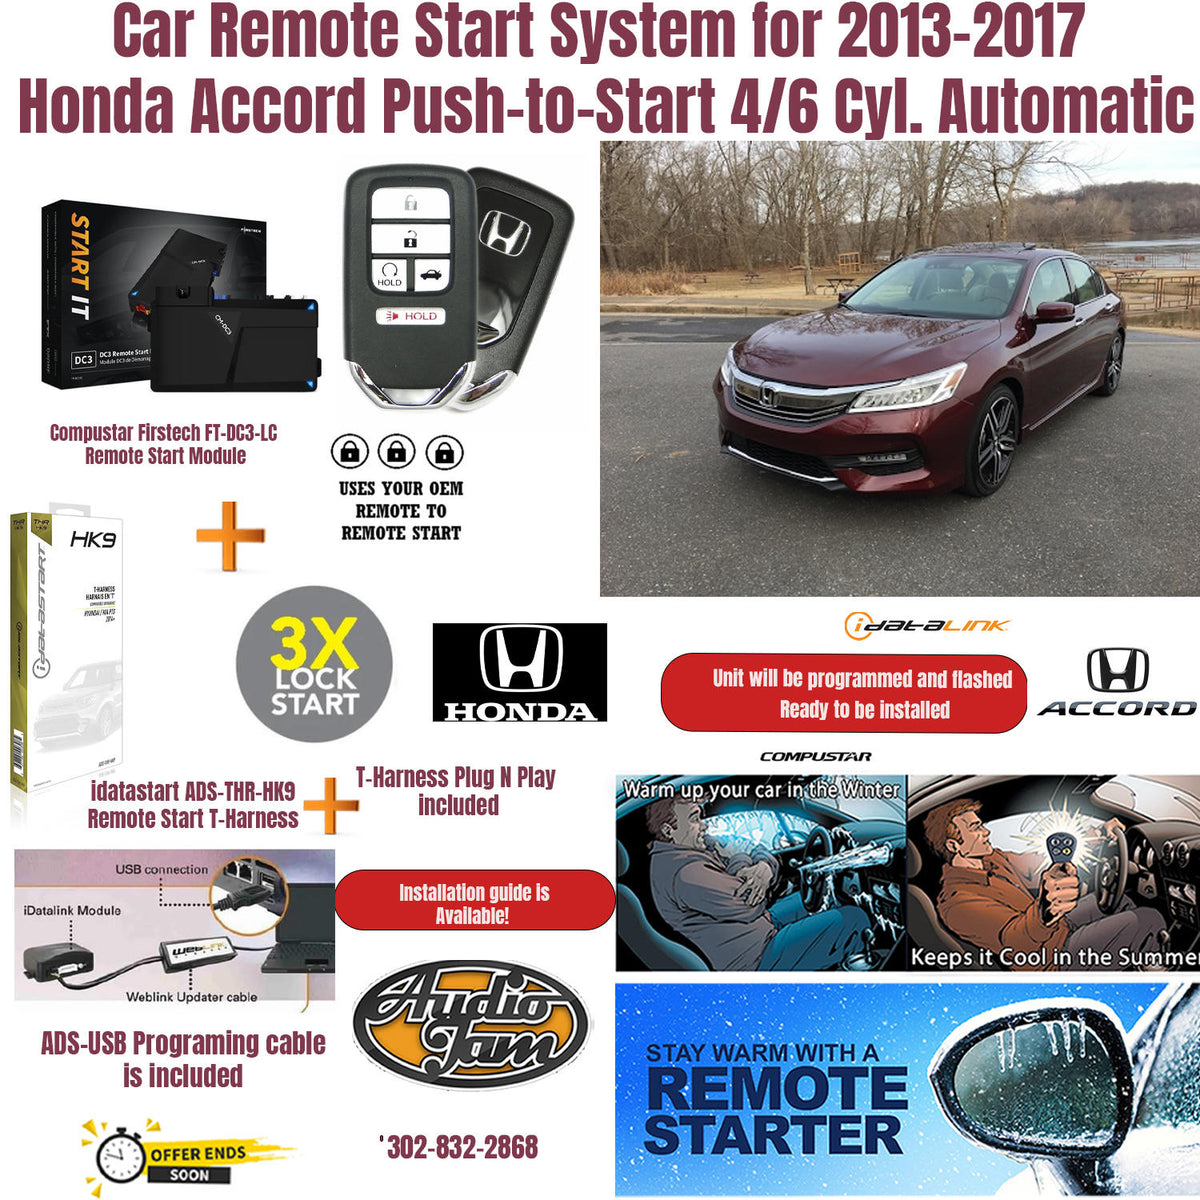 Car Remote Start System for 2013-2017 Honda Accord Push-to-Start 4/6 Cyl. Automatic Including ADS-USB Programming Cable.